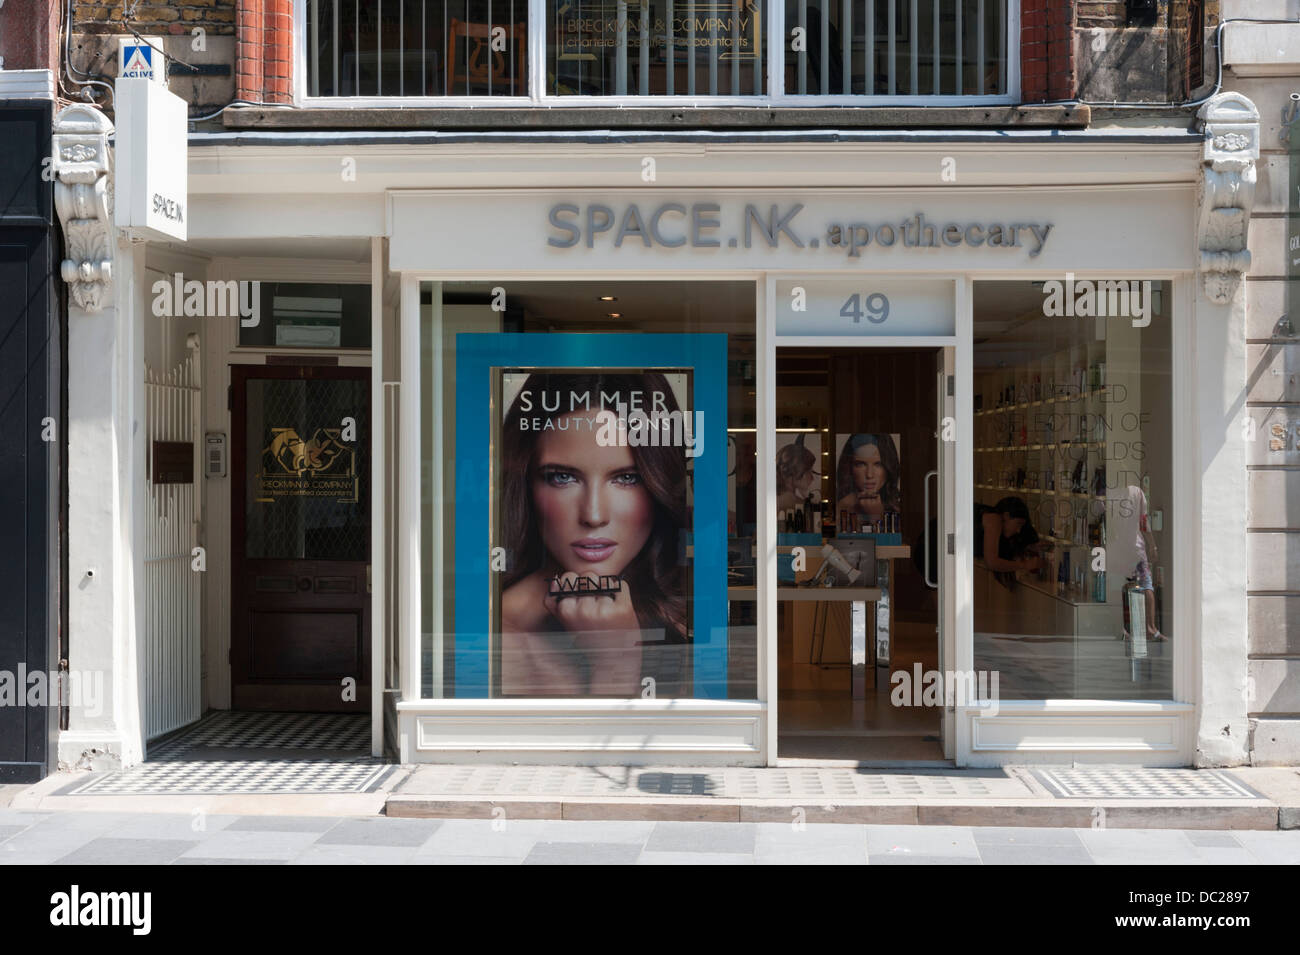 Space NK apothecary shop,South Molton Street London UK Banque D'Images